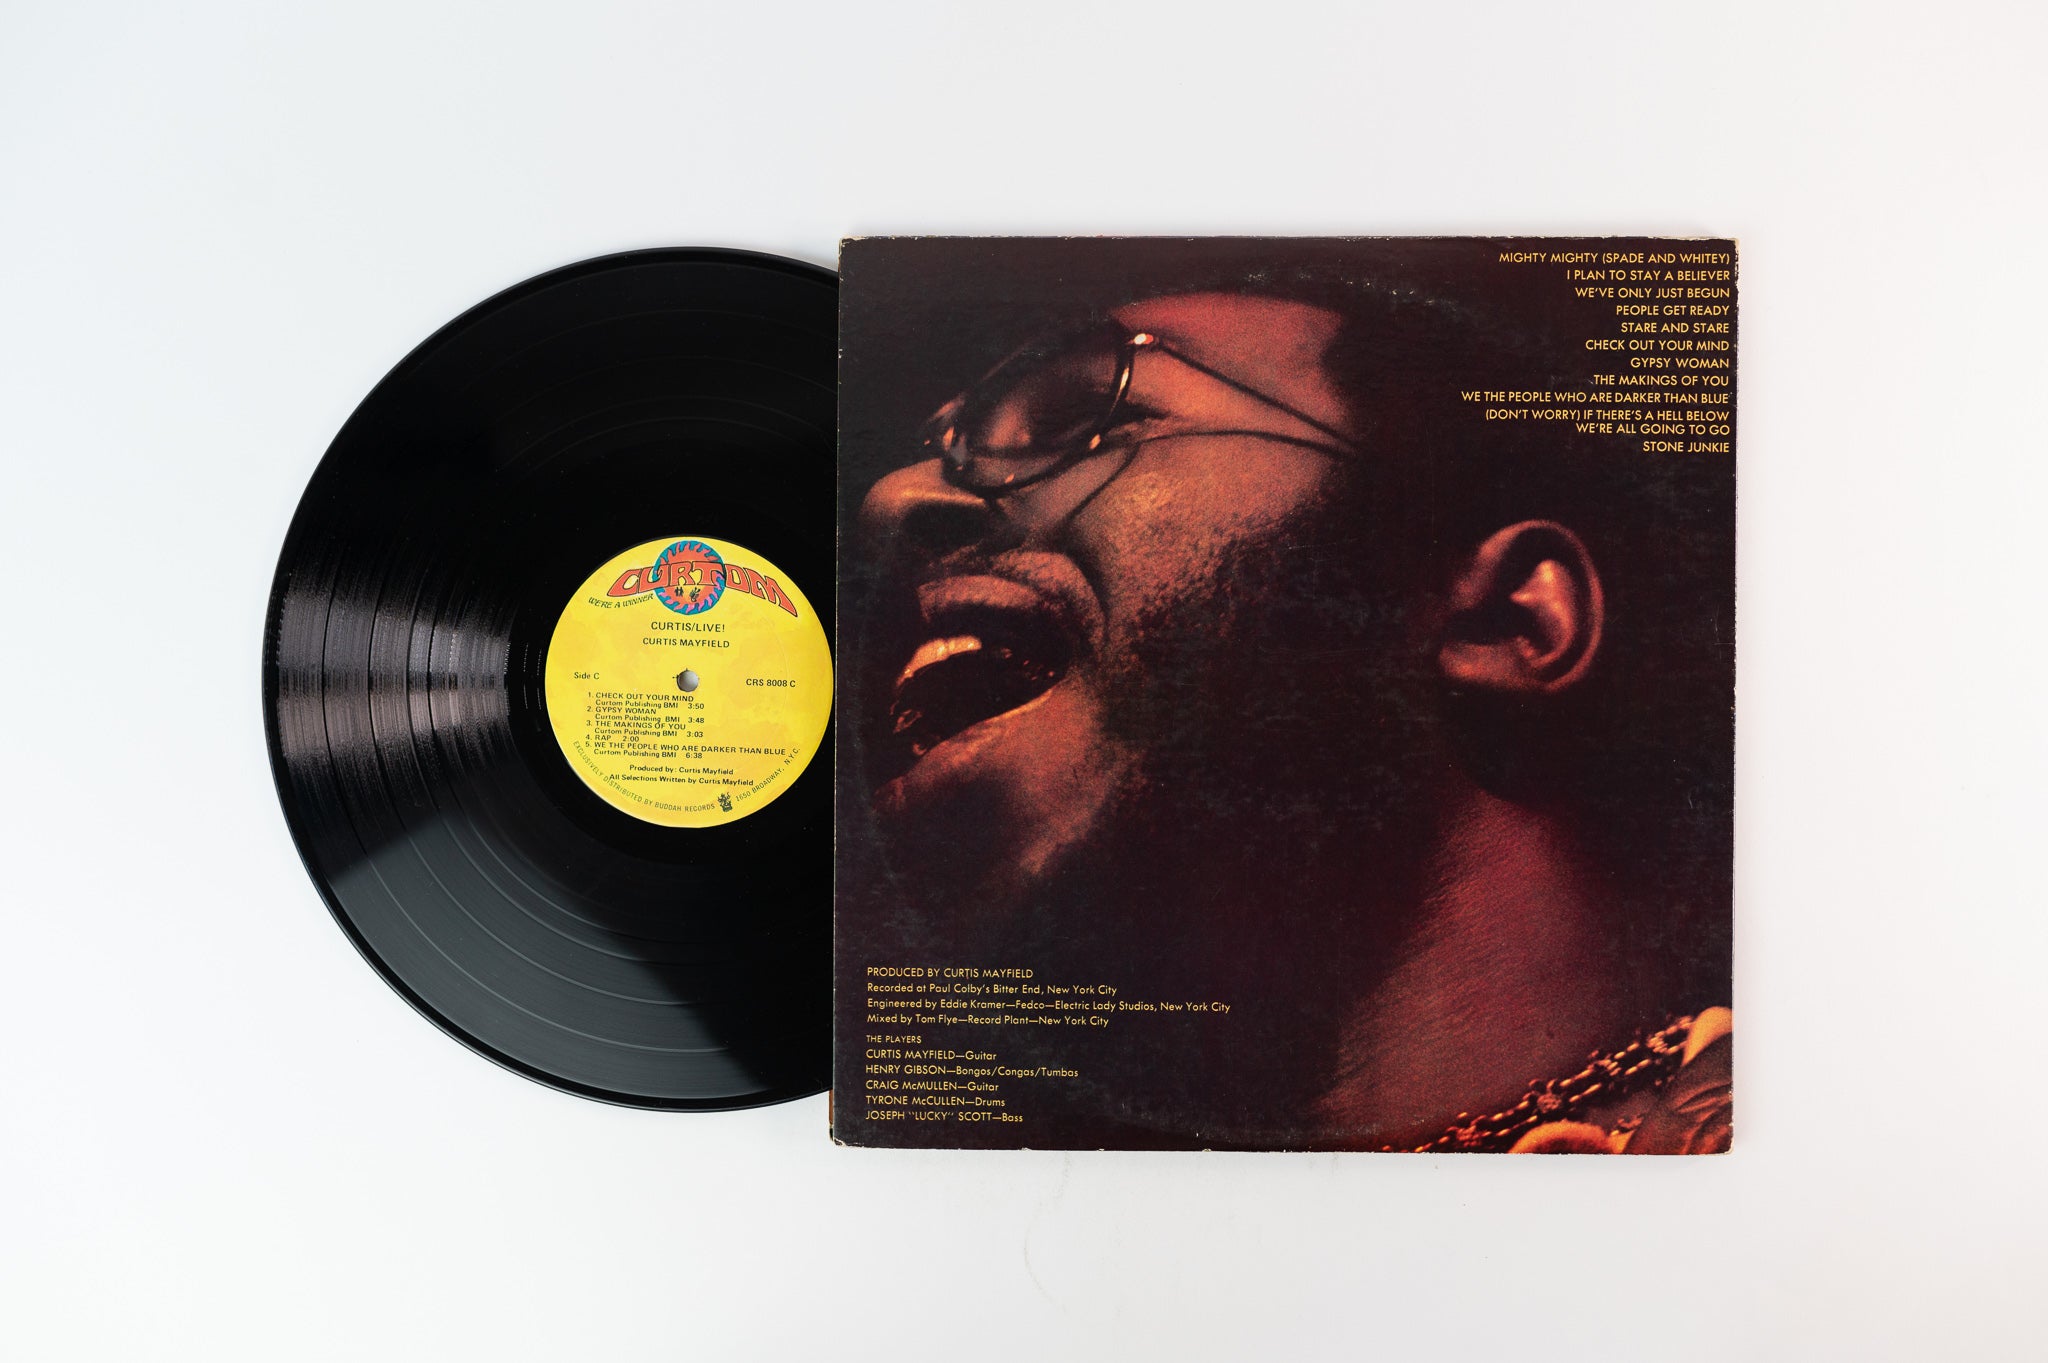 Curtis Mayfield - Curtis / Live! on Curtom